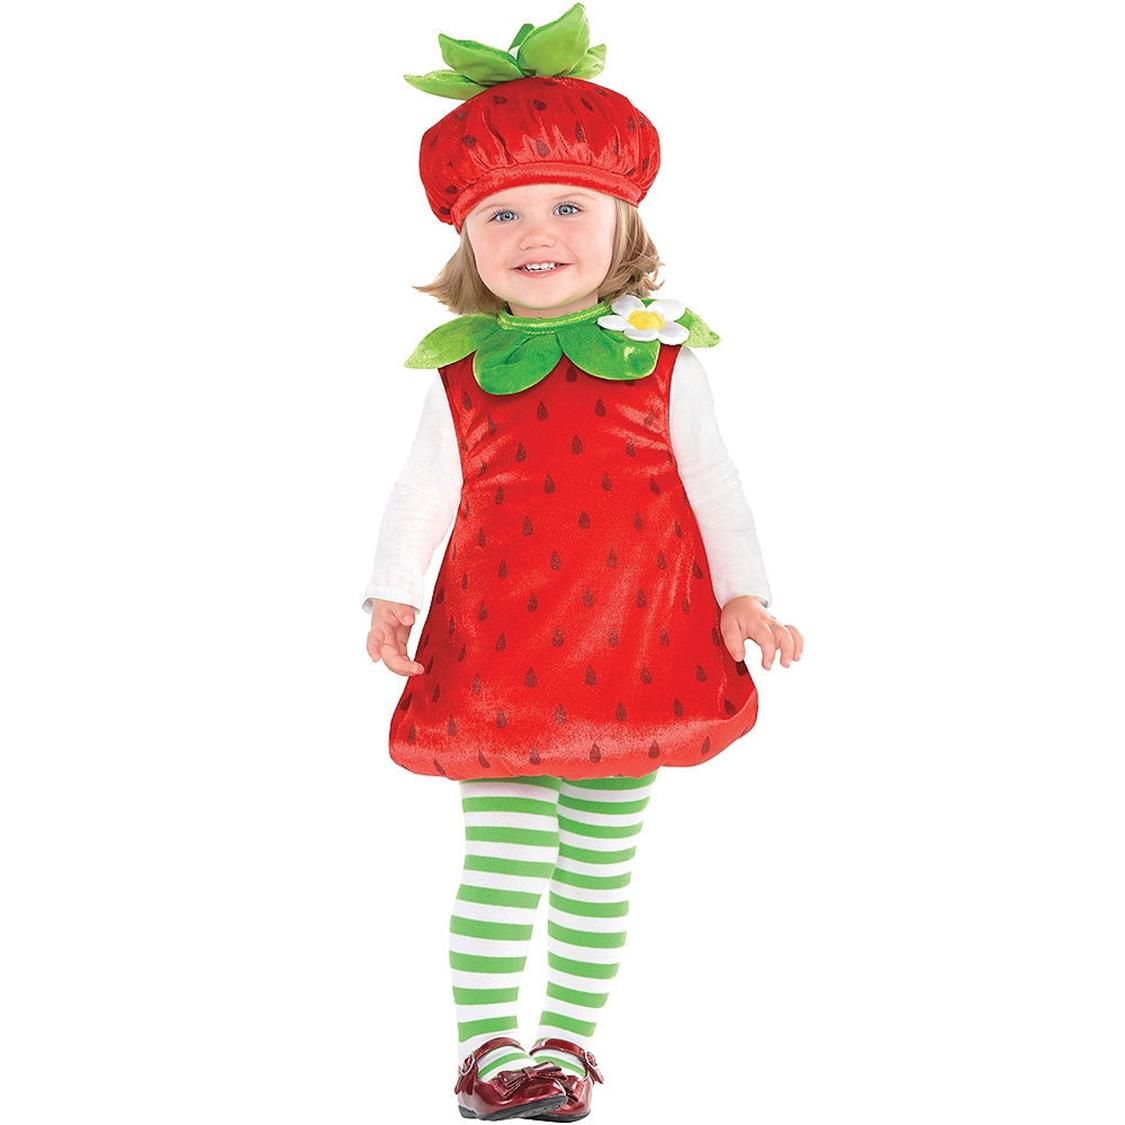 Buy arythe Kids Strawberry Suit for Children's Day Party Costume Fruit Fancy  Dress Online at Low Prices in India - Amazon.in